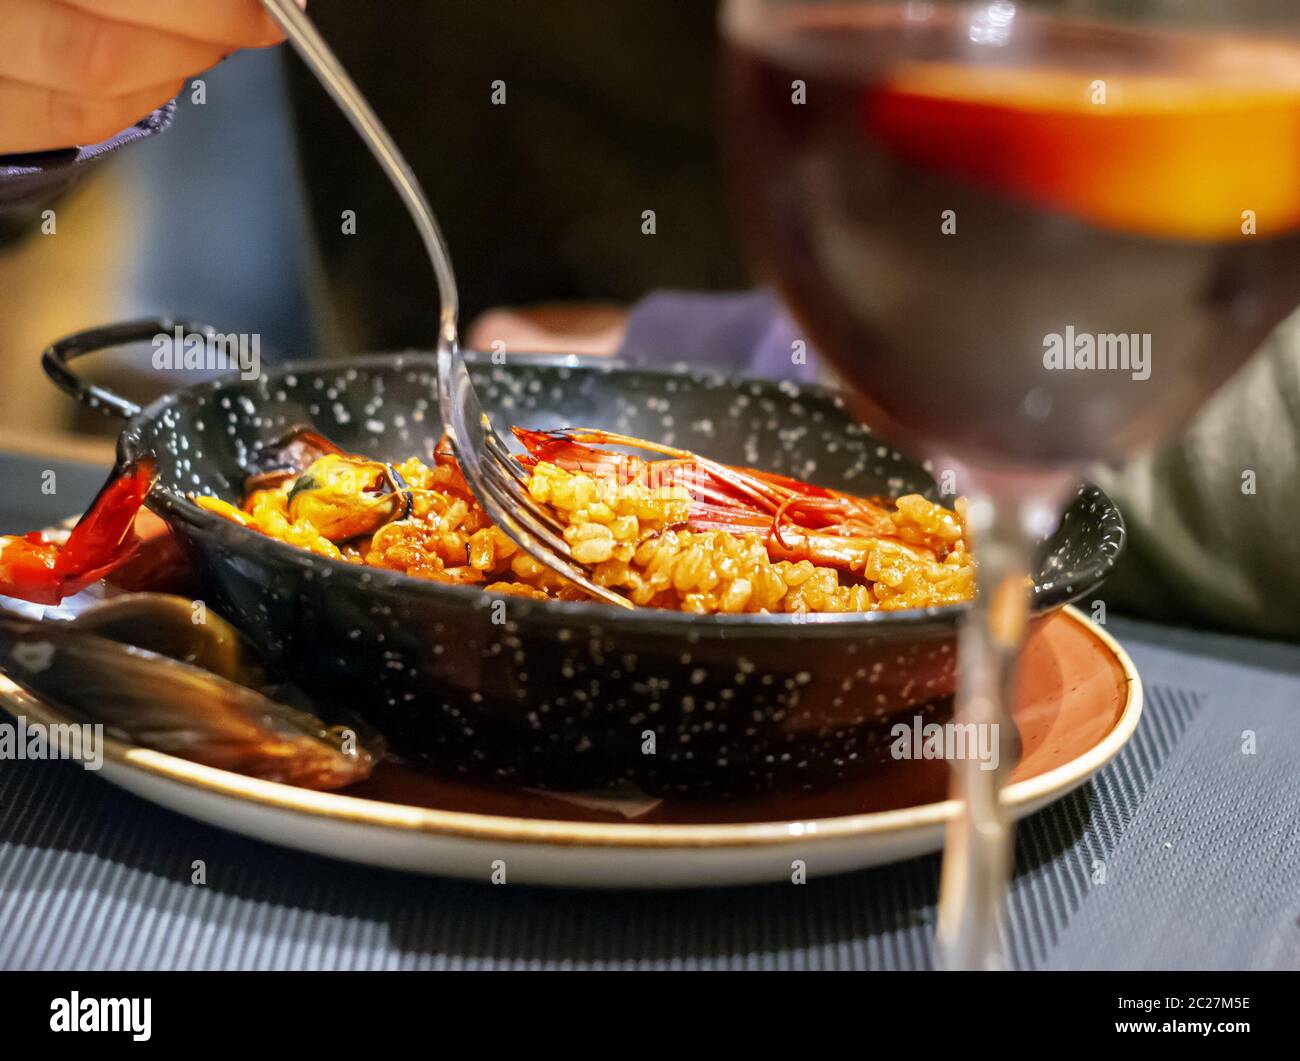 eating Valencian paella in a black pan using a fork Stock Photo